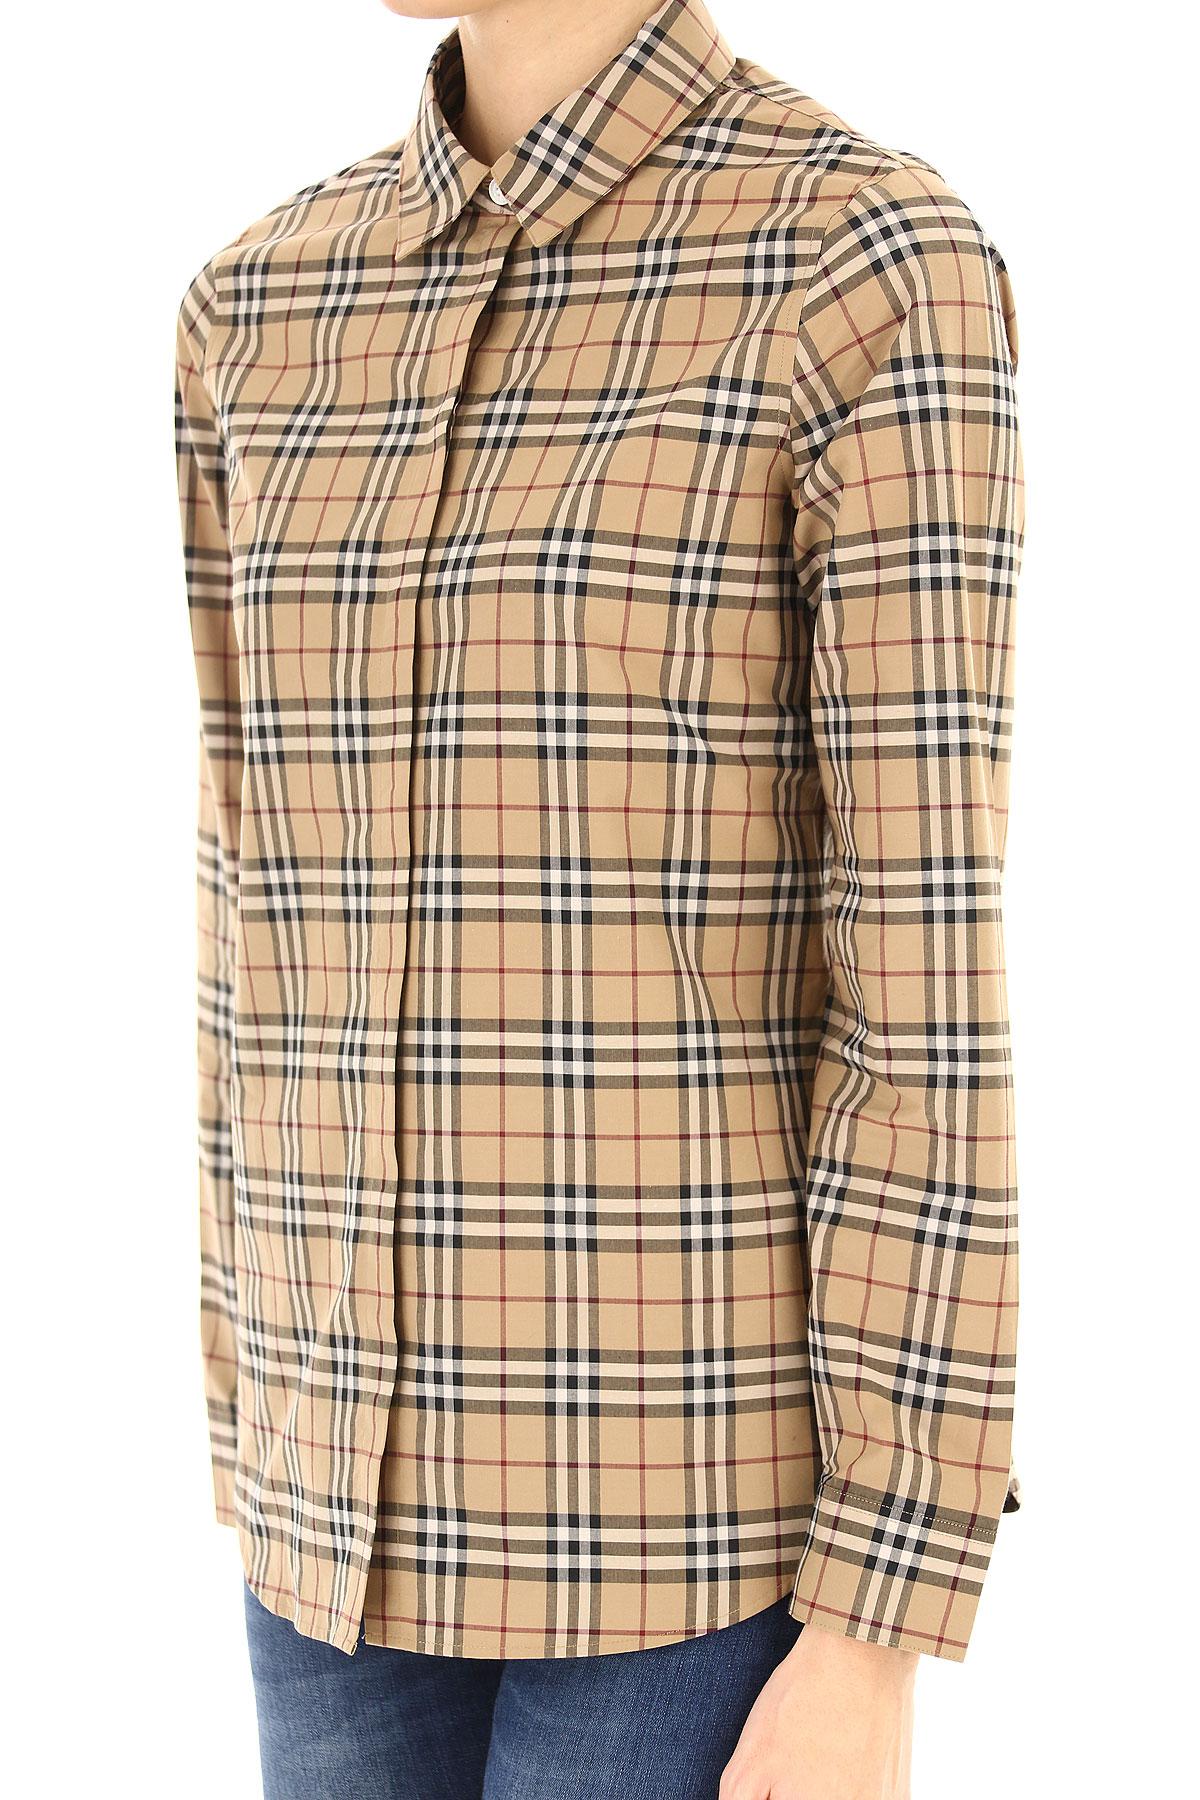 Burberry Cotton Clothing For Women for Men - Lyst